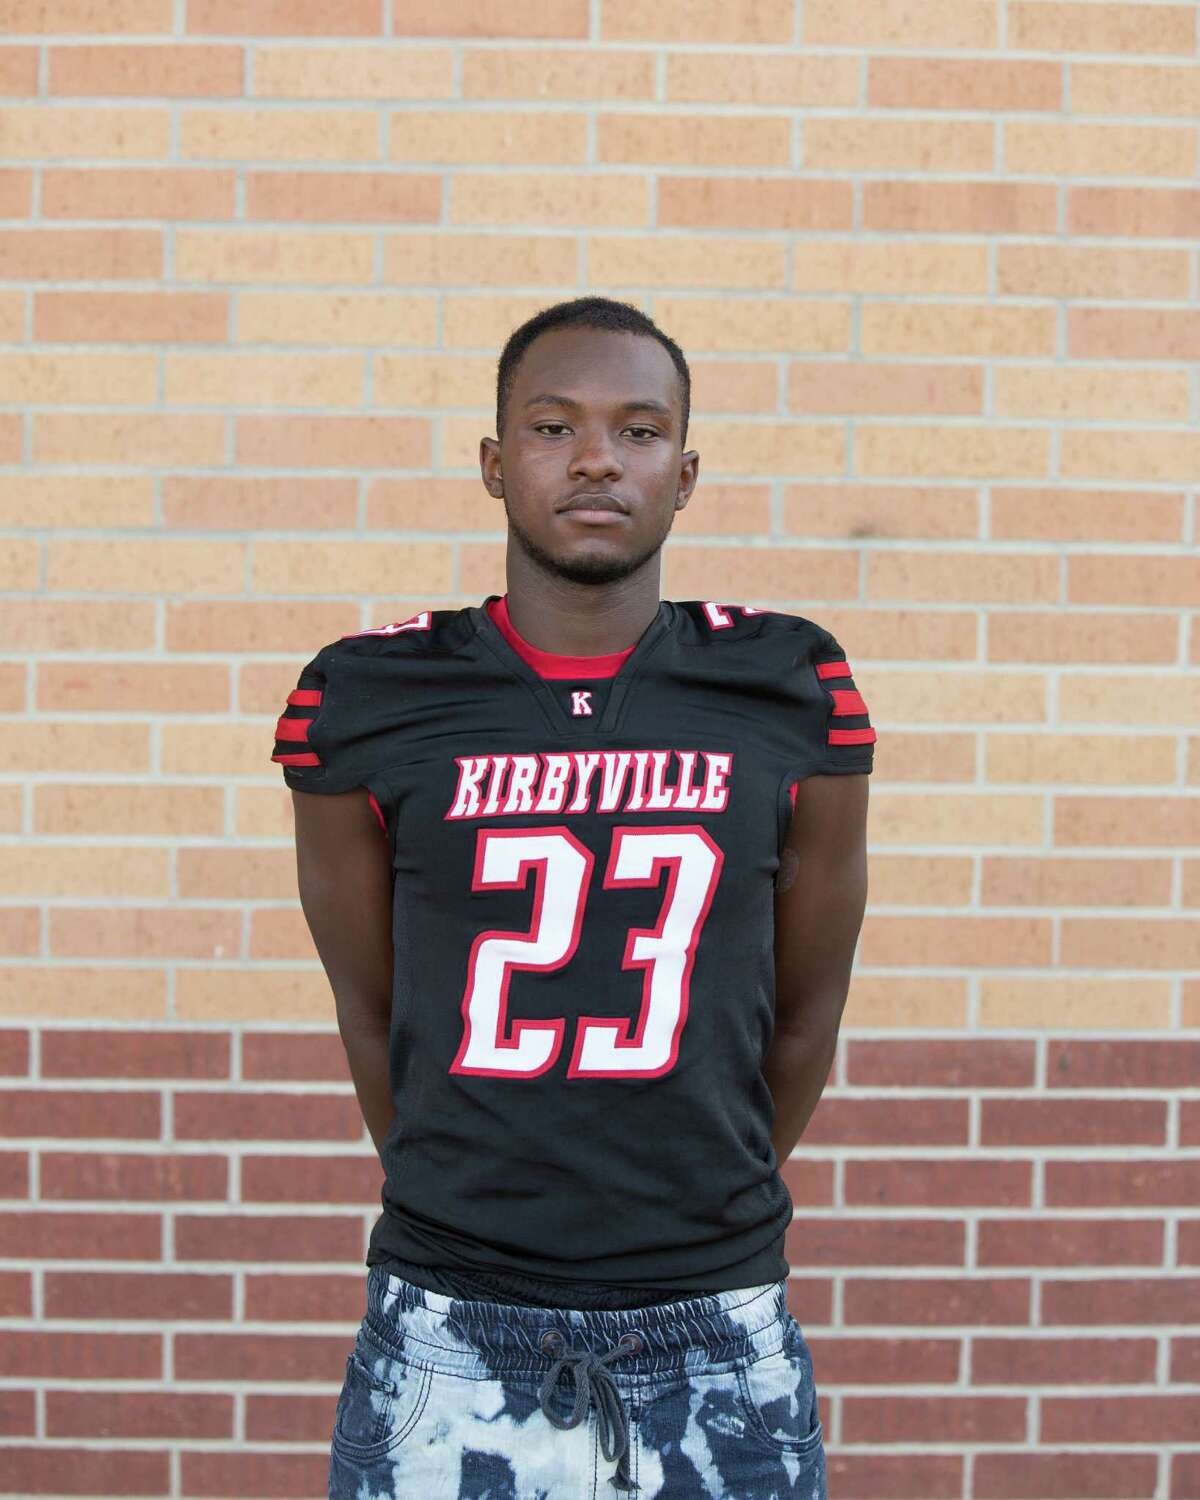 Pat Beaty, Kirbyville  Position: RB  Height: 5-11  Weight: 175 pounds  Grade: Senior  Beaty also rushed for over 1,000 yards last season and adds great depth to a stacked Wildcat backfield. Beay and Dennis may be the best one-two punch in Class 3A.